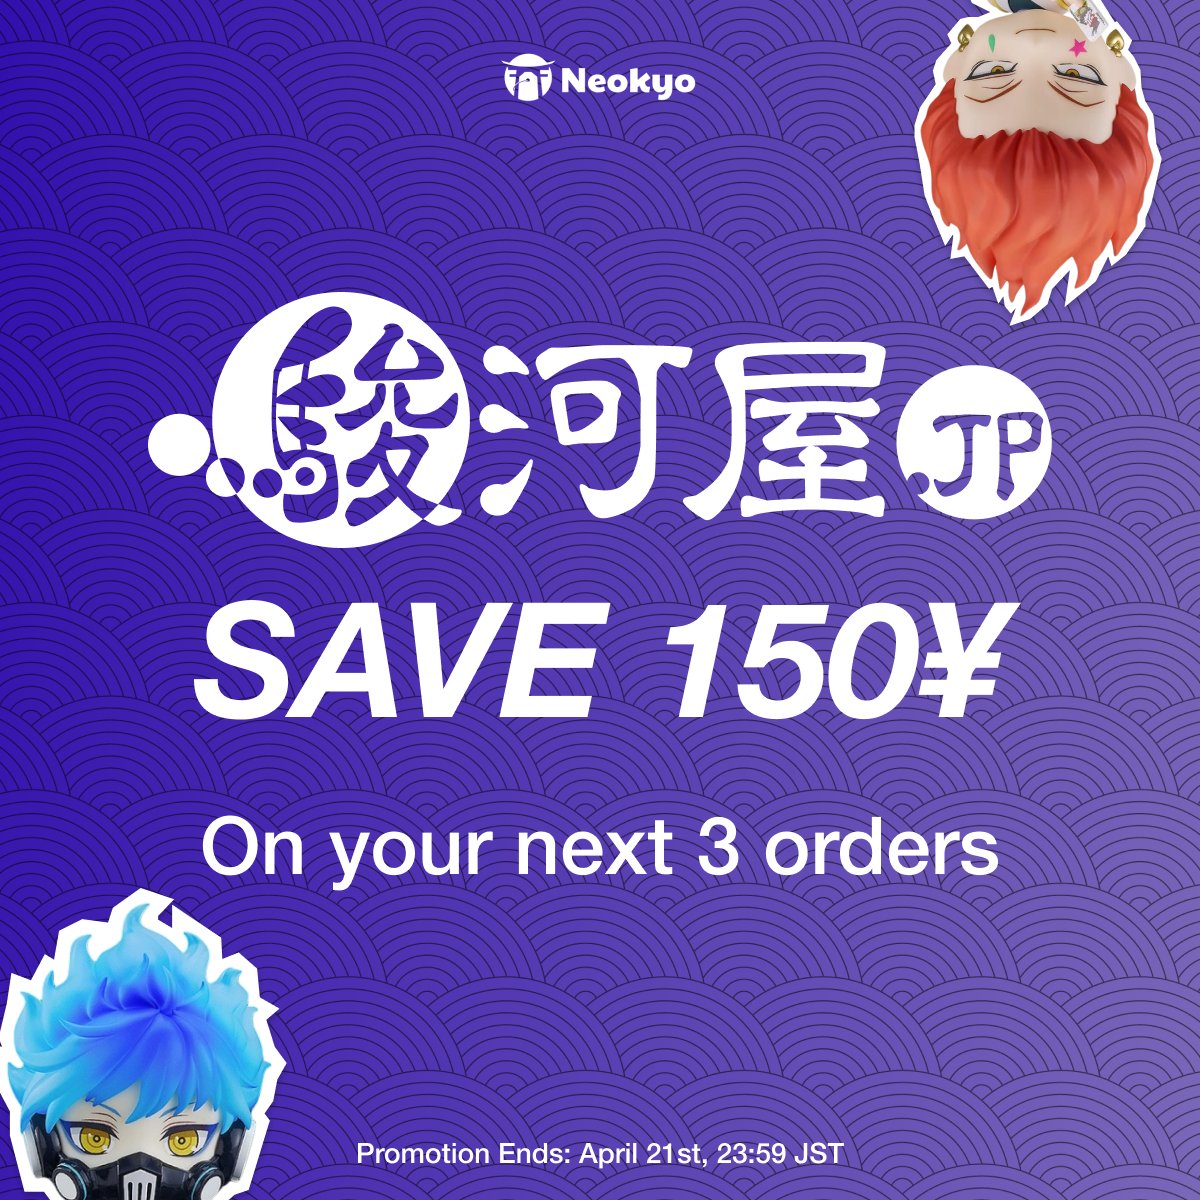 It's time get 2 discounts in 1! Suruga-ya is having a sale where you can save up to 87% and we're also offering you 3 coupons to help save an additional 150¥ until April 21st, 23:59 JST.

🛍️ SHOP NOW: ad.neokyo.com/twitter-promo

#Surugaya #neokyo #animefigures #shopjapan #japanproxy